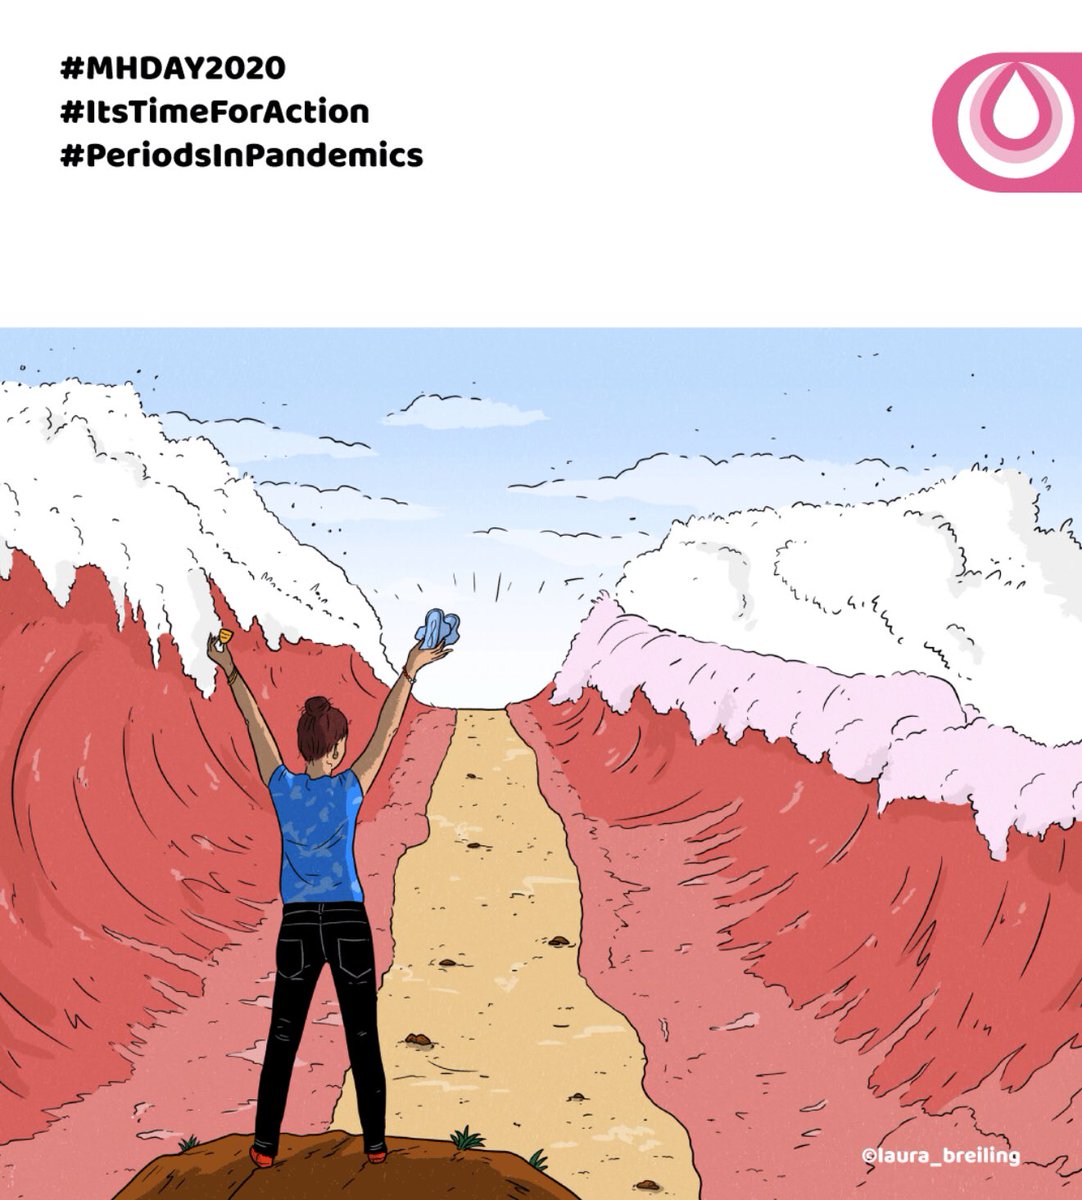 Today is  #MenstrualHygieneDay . The campaign of Menstrual Hygiene Day - Global has a a special focus this year on  #PeriodsInPandemics. One of the reasons we started the LLL sessions (Lockdowned Lesbians Listening) was because 1/5 #MHday2020  #ItsTimeForAction  #PeriodsInPandemics